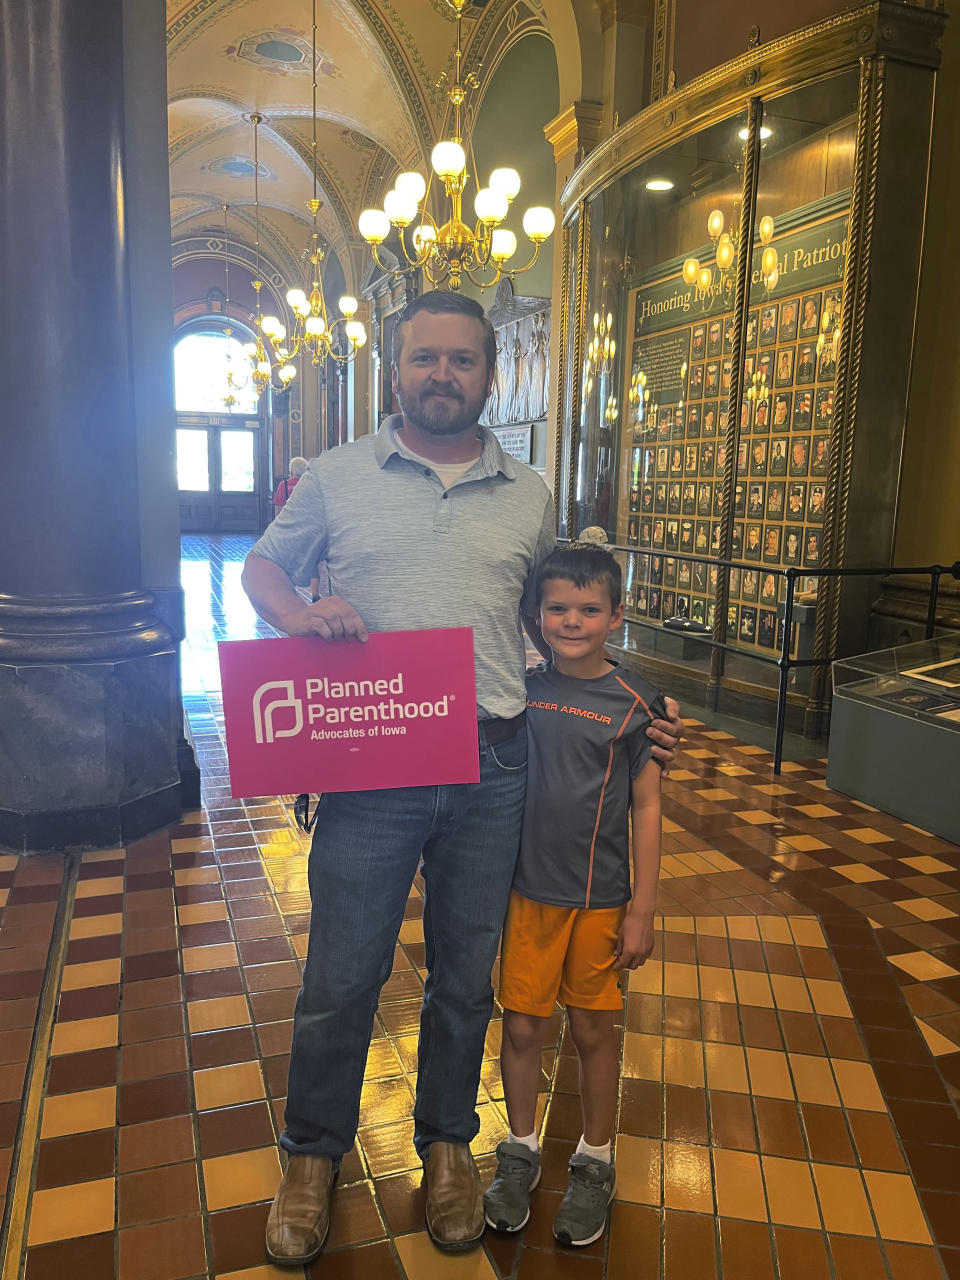 Tim Rutledge, 37, and his son, 8, join protesters at the Iowa Capitol rotunda to voice opposition to the new ban on abortion after roughly six weeks of pregnancy introduced by Republican lawmakers in a special session in Des Moines, Iowa, on Tuesday, July 11, 2023. (AP Photo/Hannah Fingerhut)